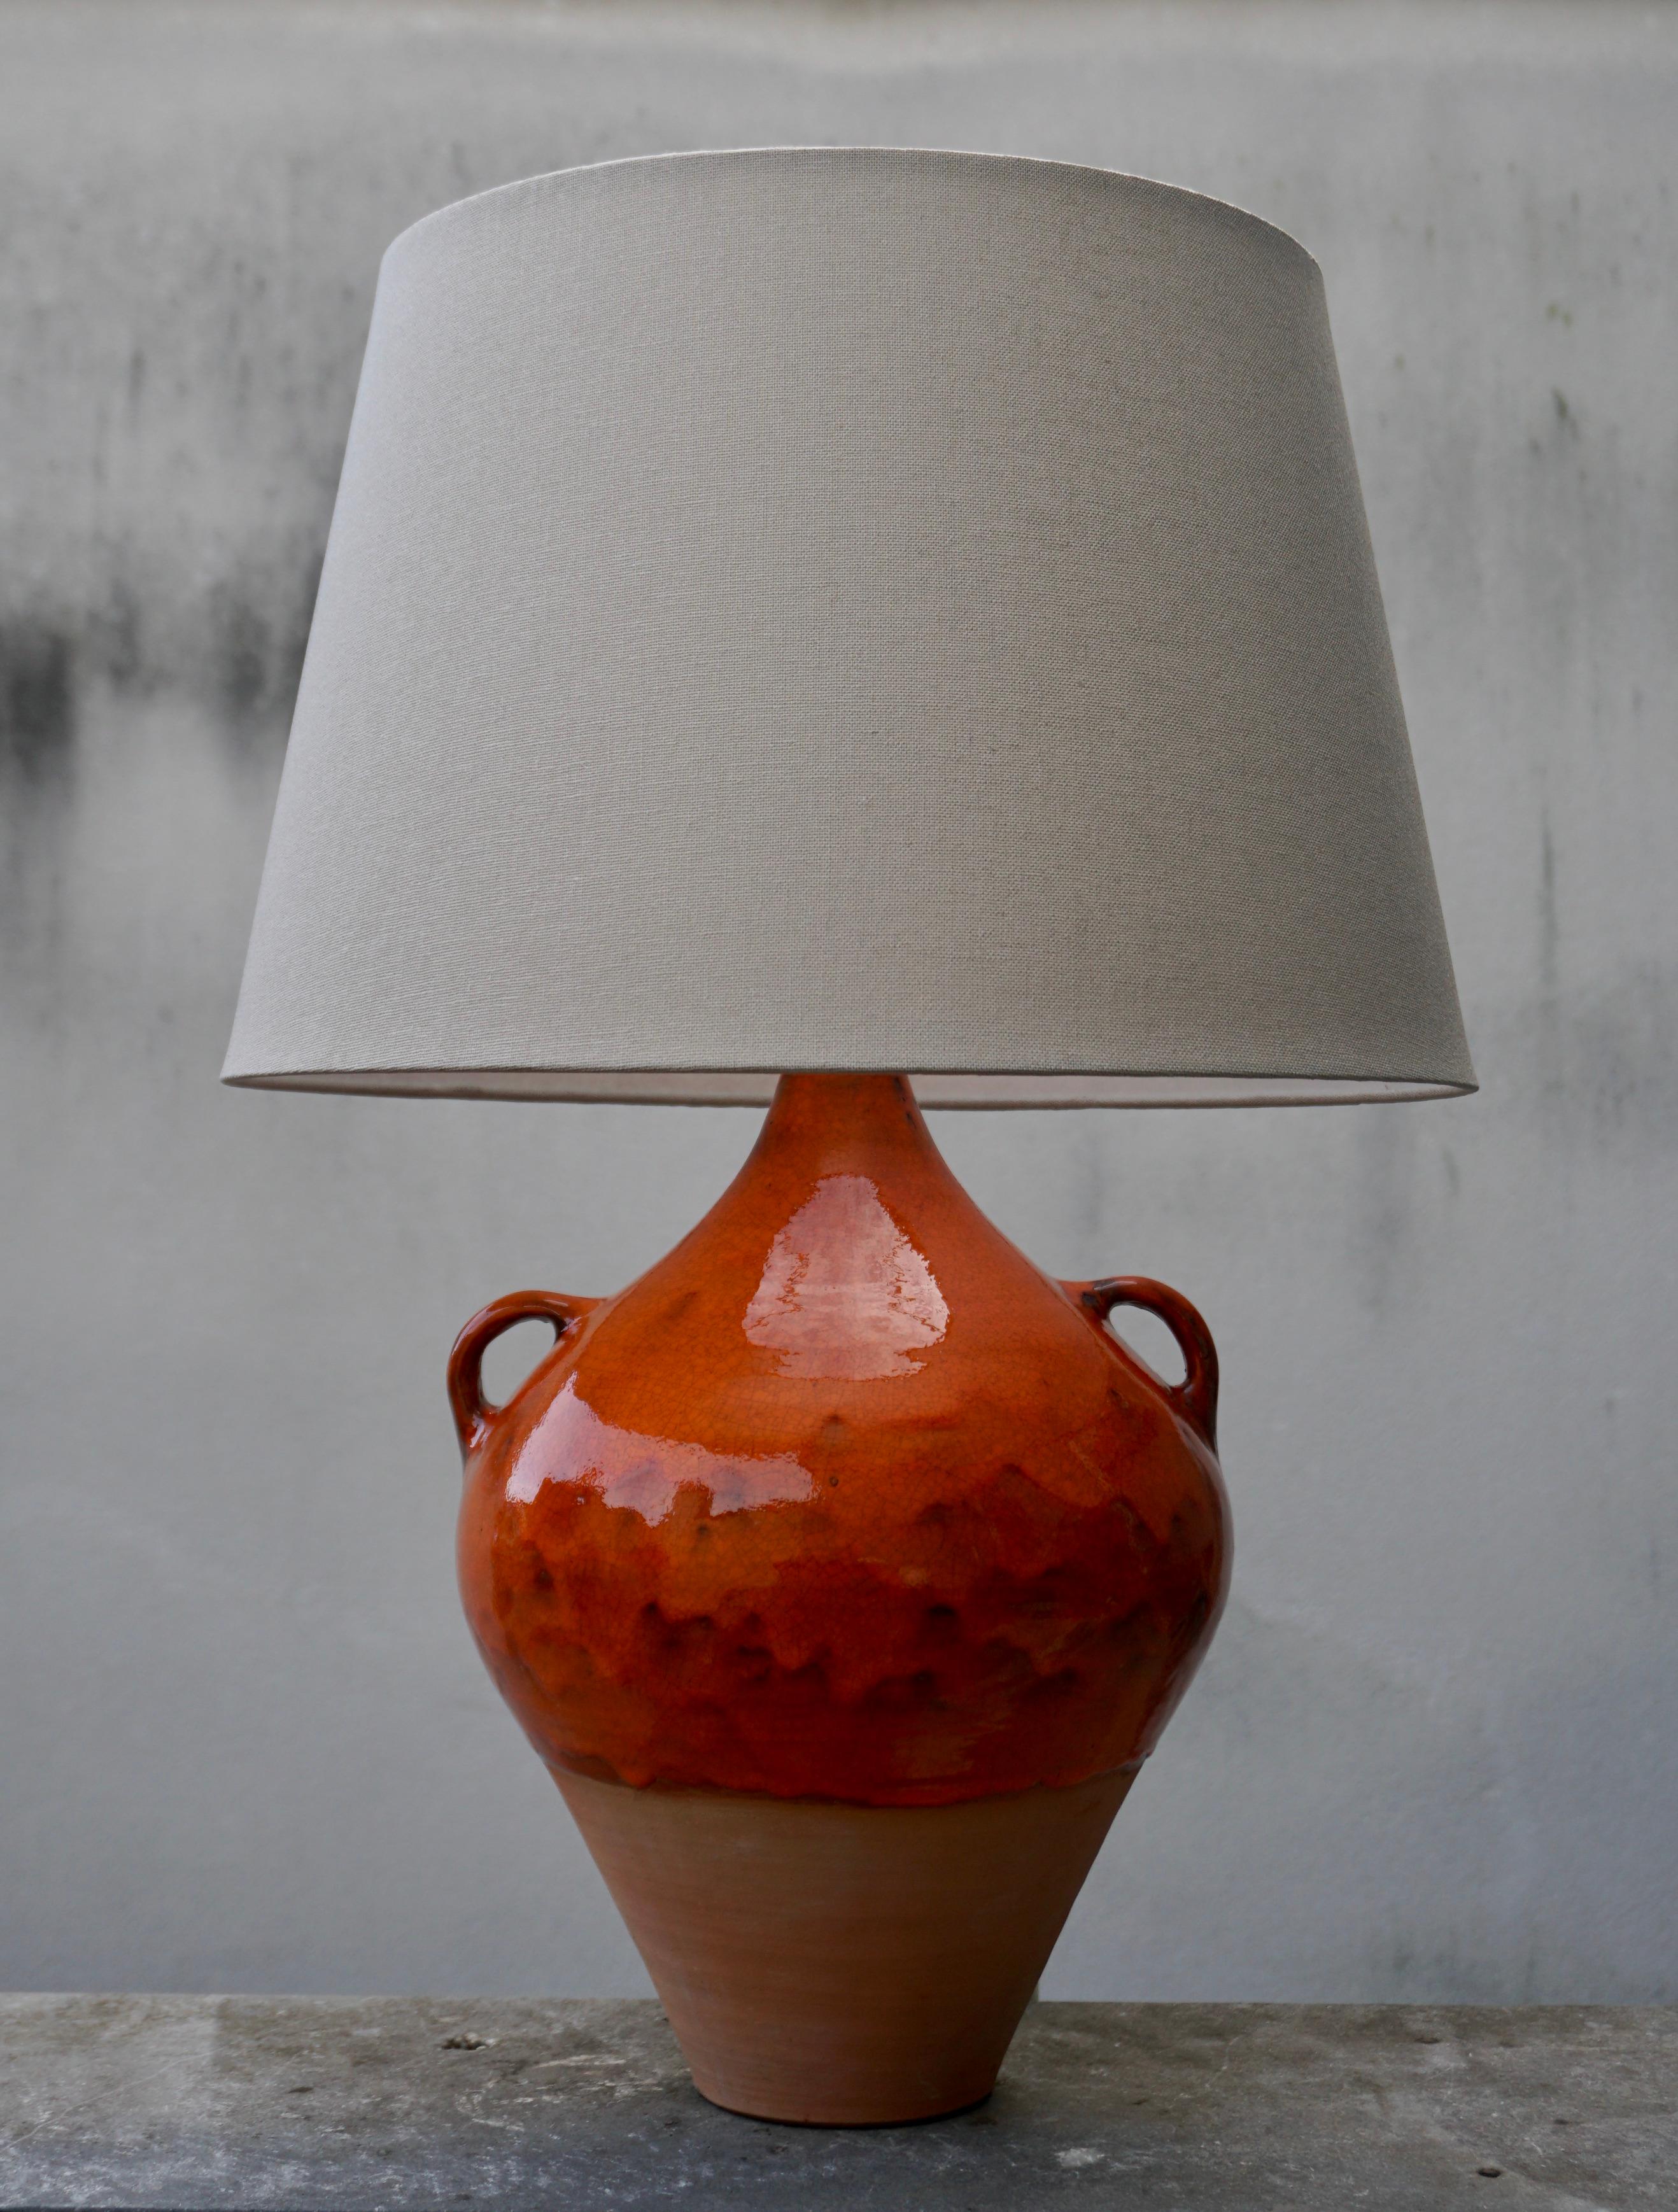 Handmade orange ceramic table lamp.

The measurements of the lamp without shade are 44 cm (height) and  26 cm (diameter)  